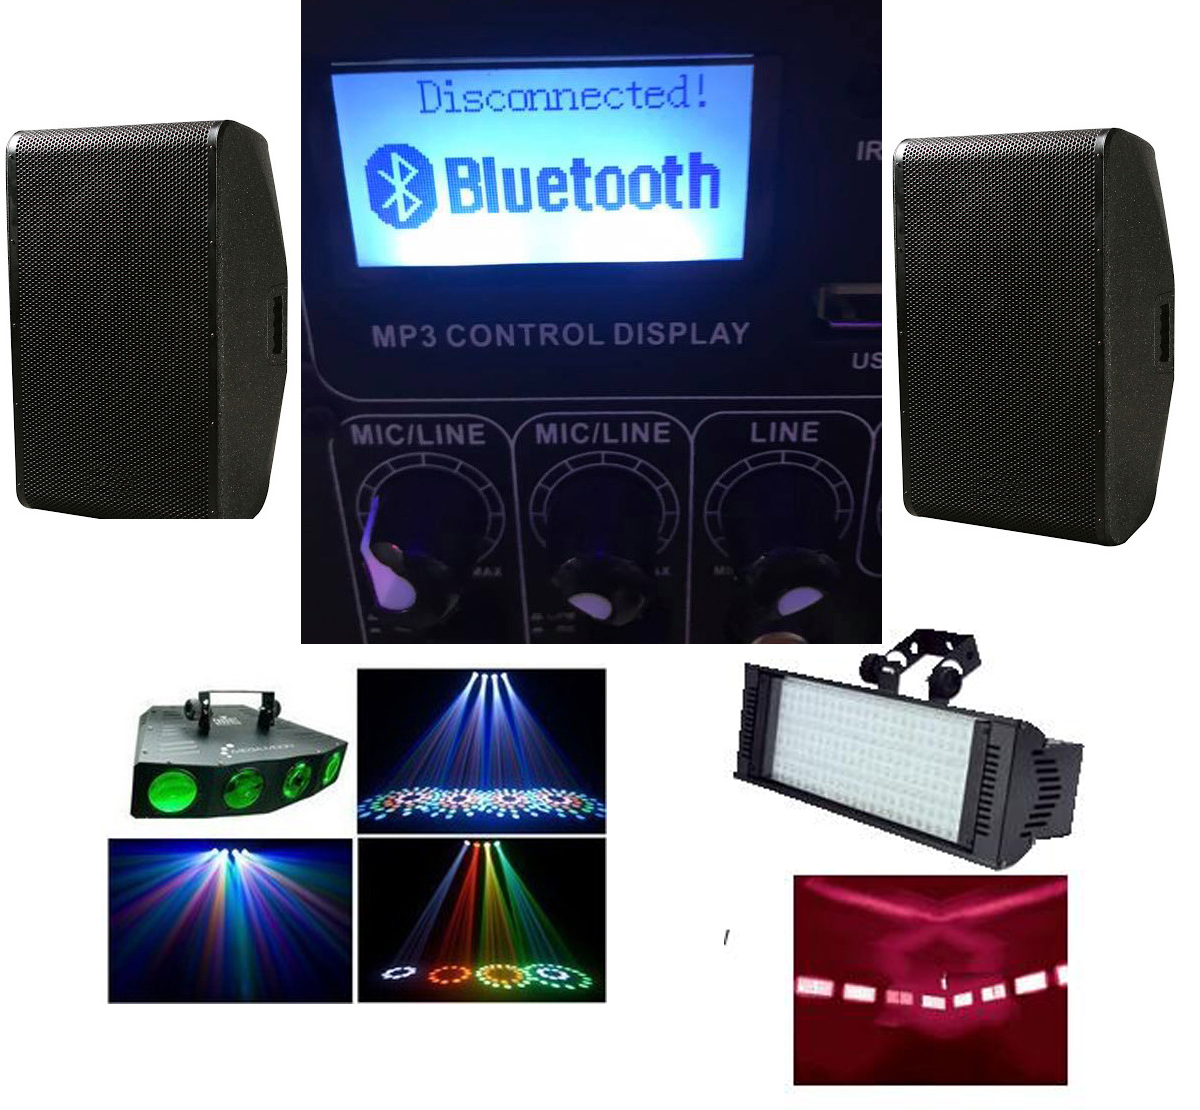 Bluetooth sound system with disco lights